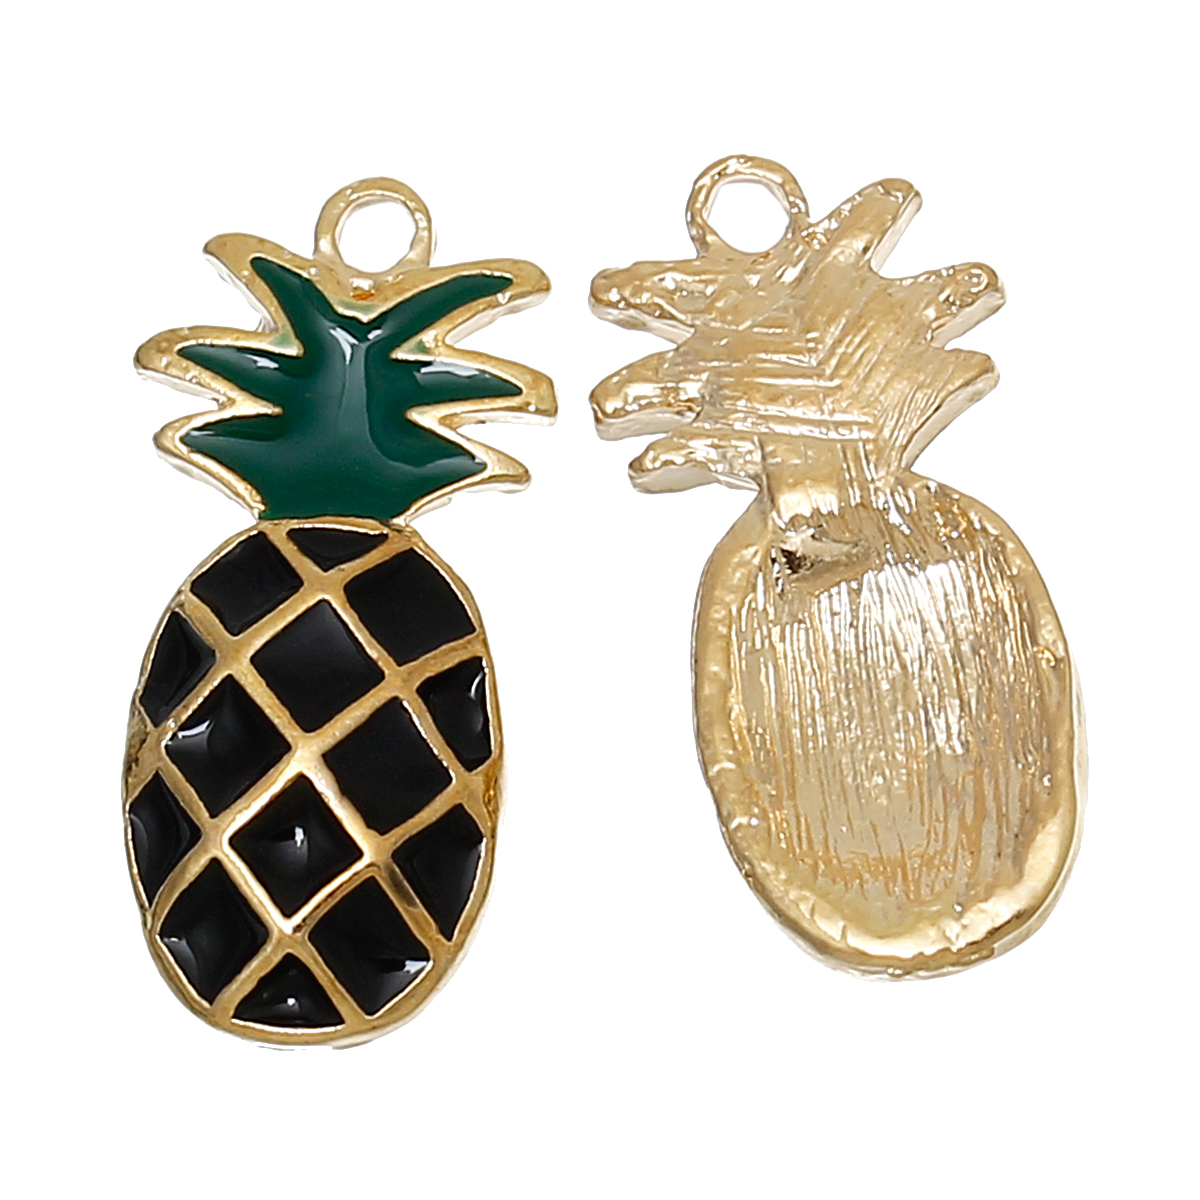 Picture of Zinc Based Alloy Charms Pineapple /Ananas Fruit Gold Plated Black & Green Enamel 24mm(1") x 11mm( 3/8"), 5 PCs